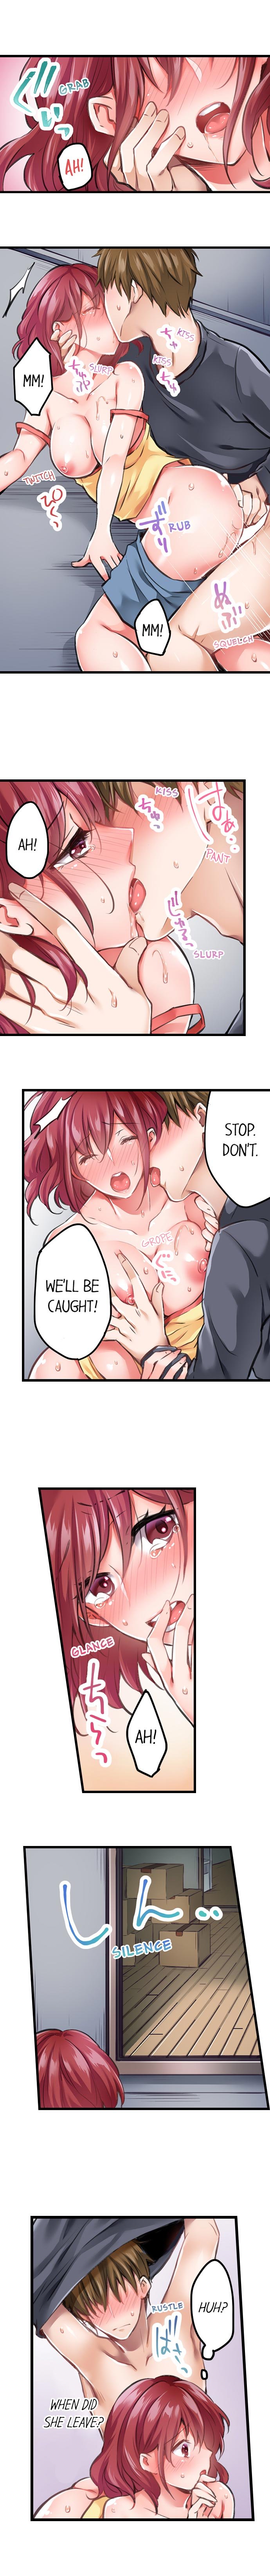 the-key-to-my-body-chap-3-5